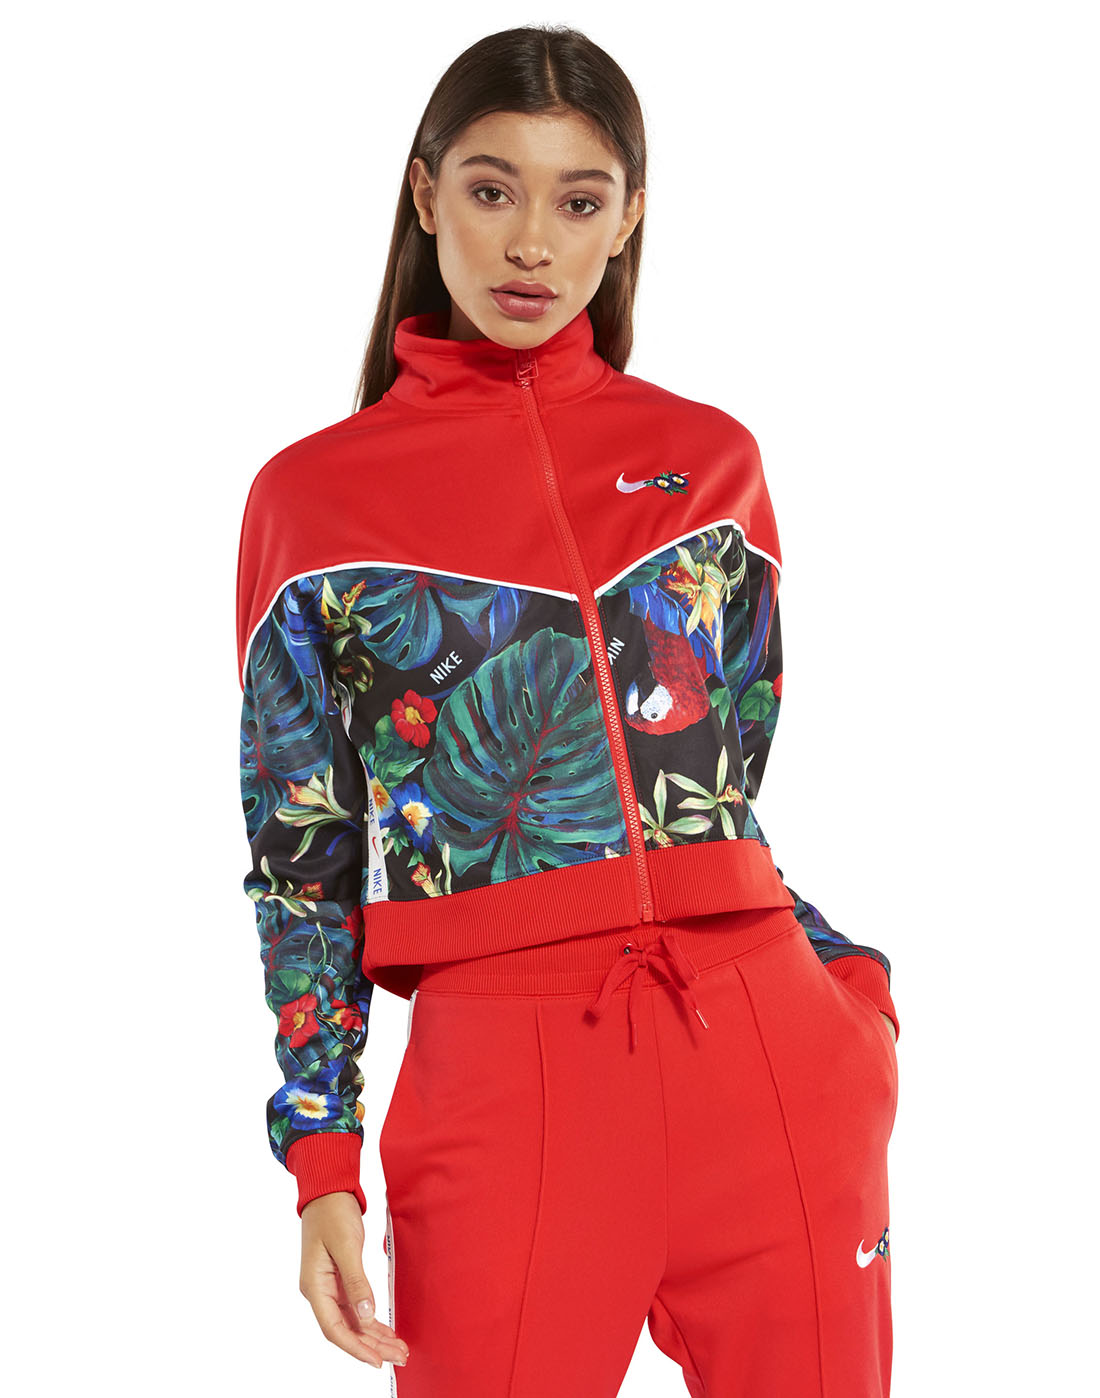 Women's Red Floral Nike Jacket | Life 